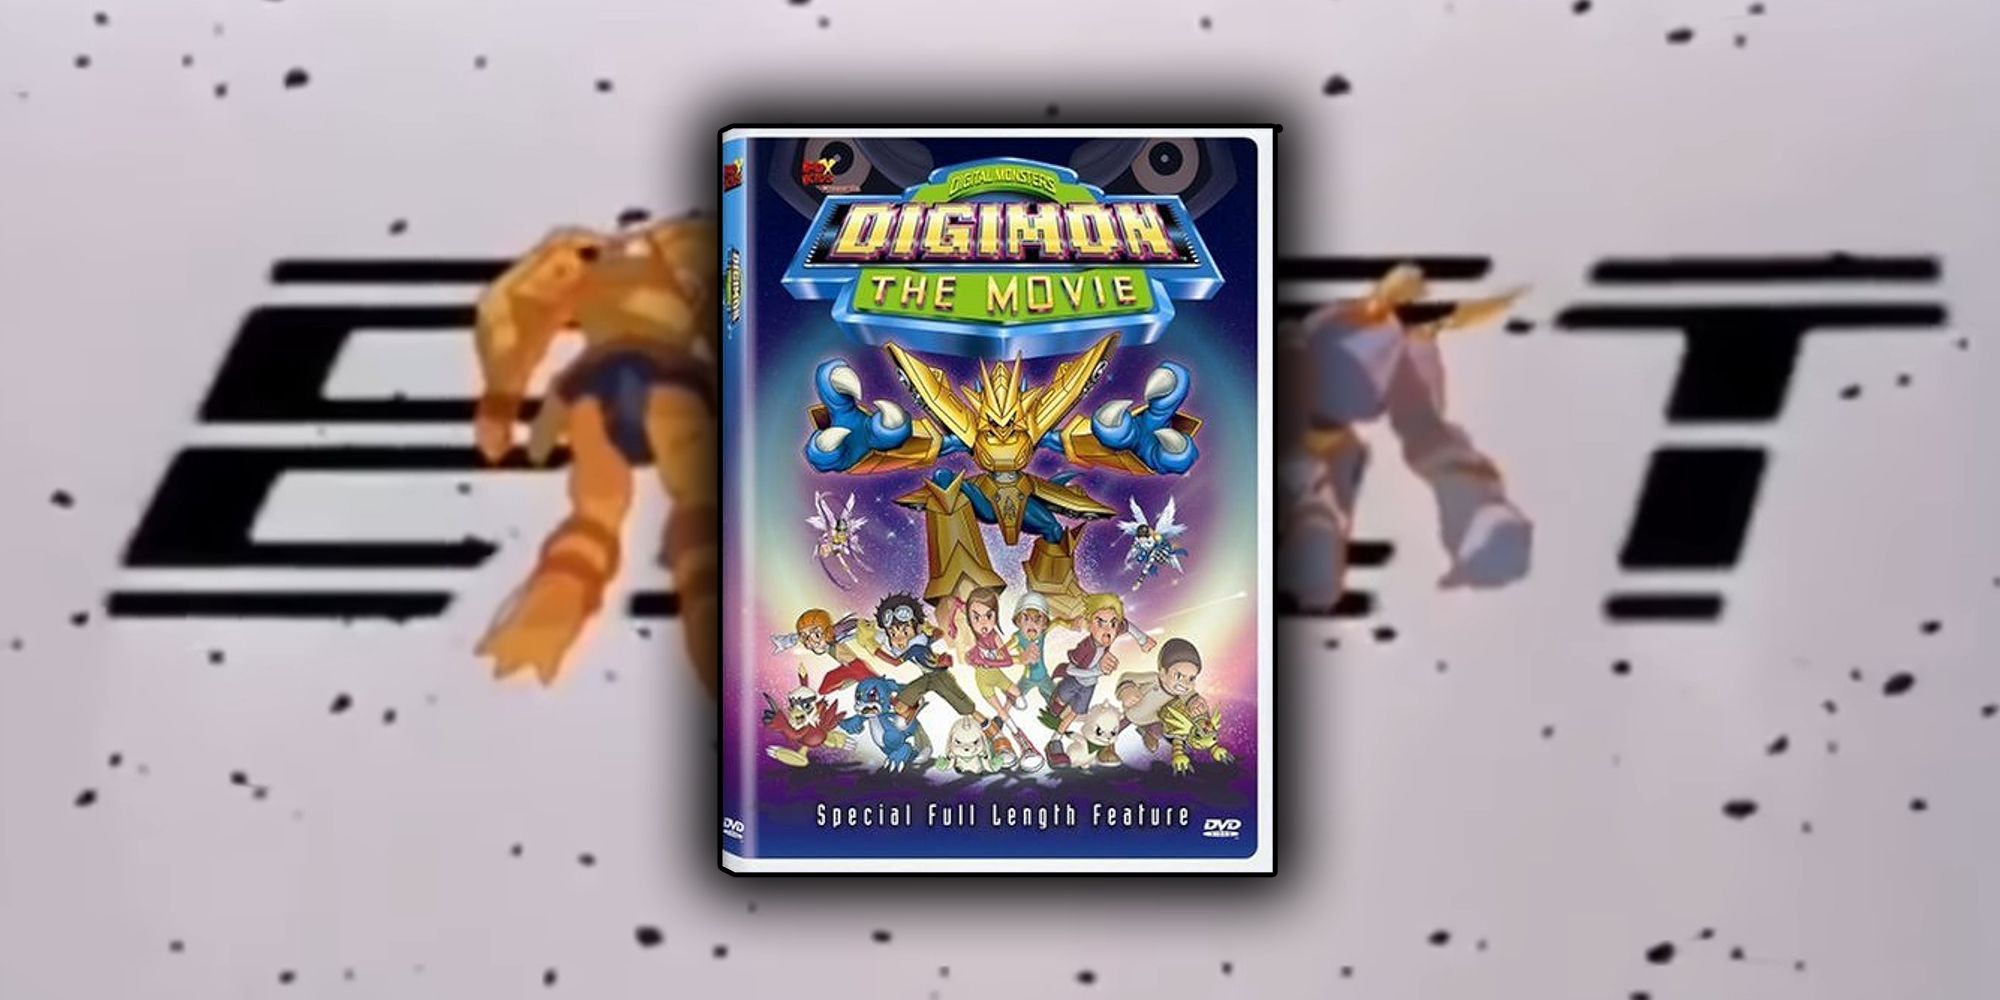 Scene From Digimon The Movie With DVD Cover On Top